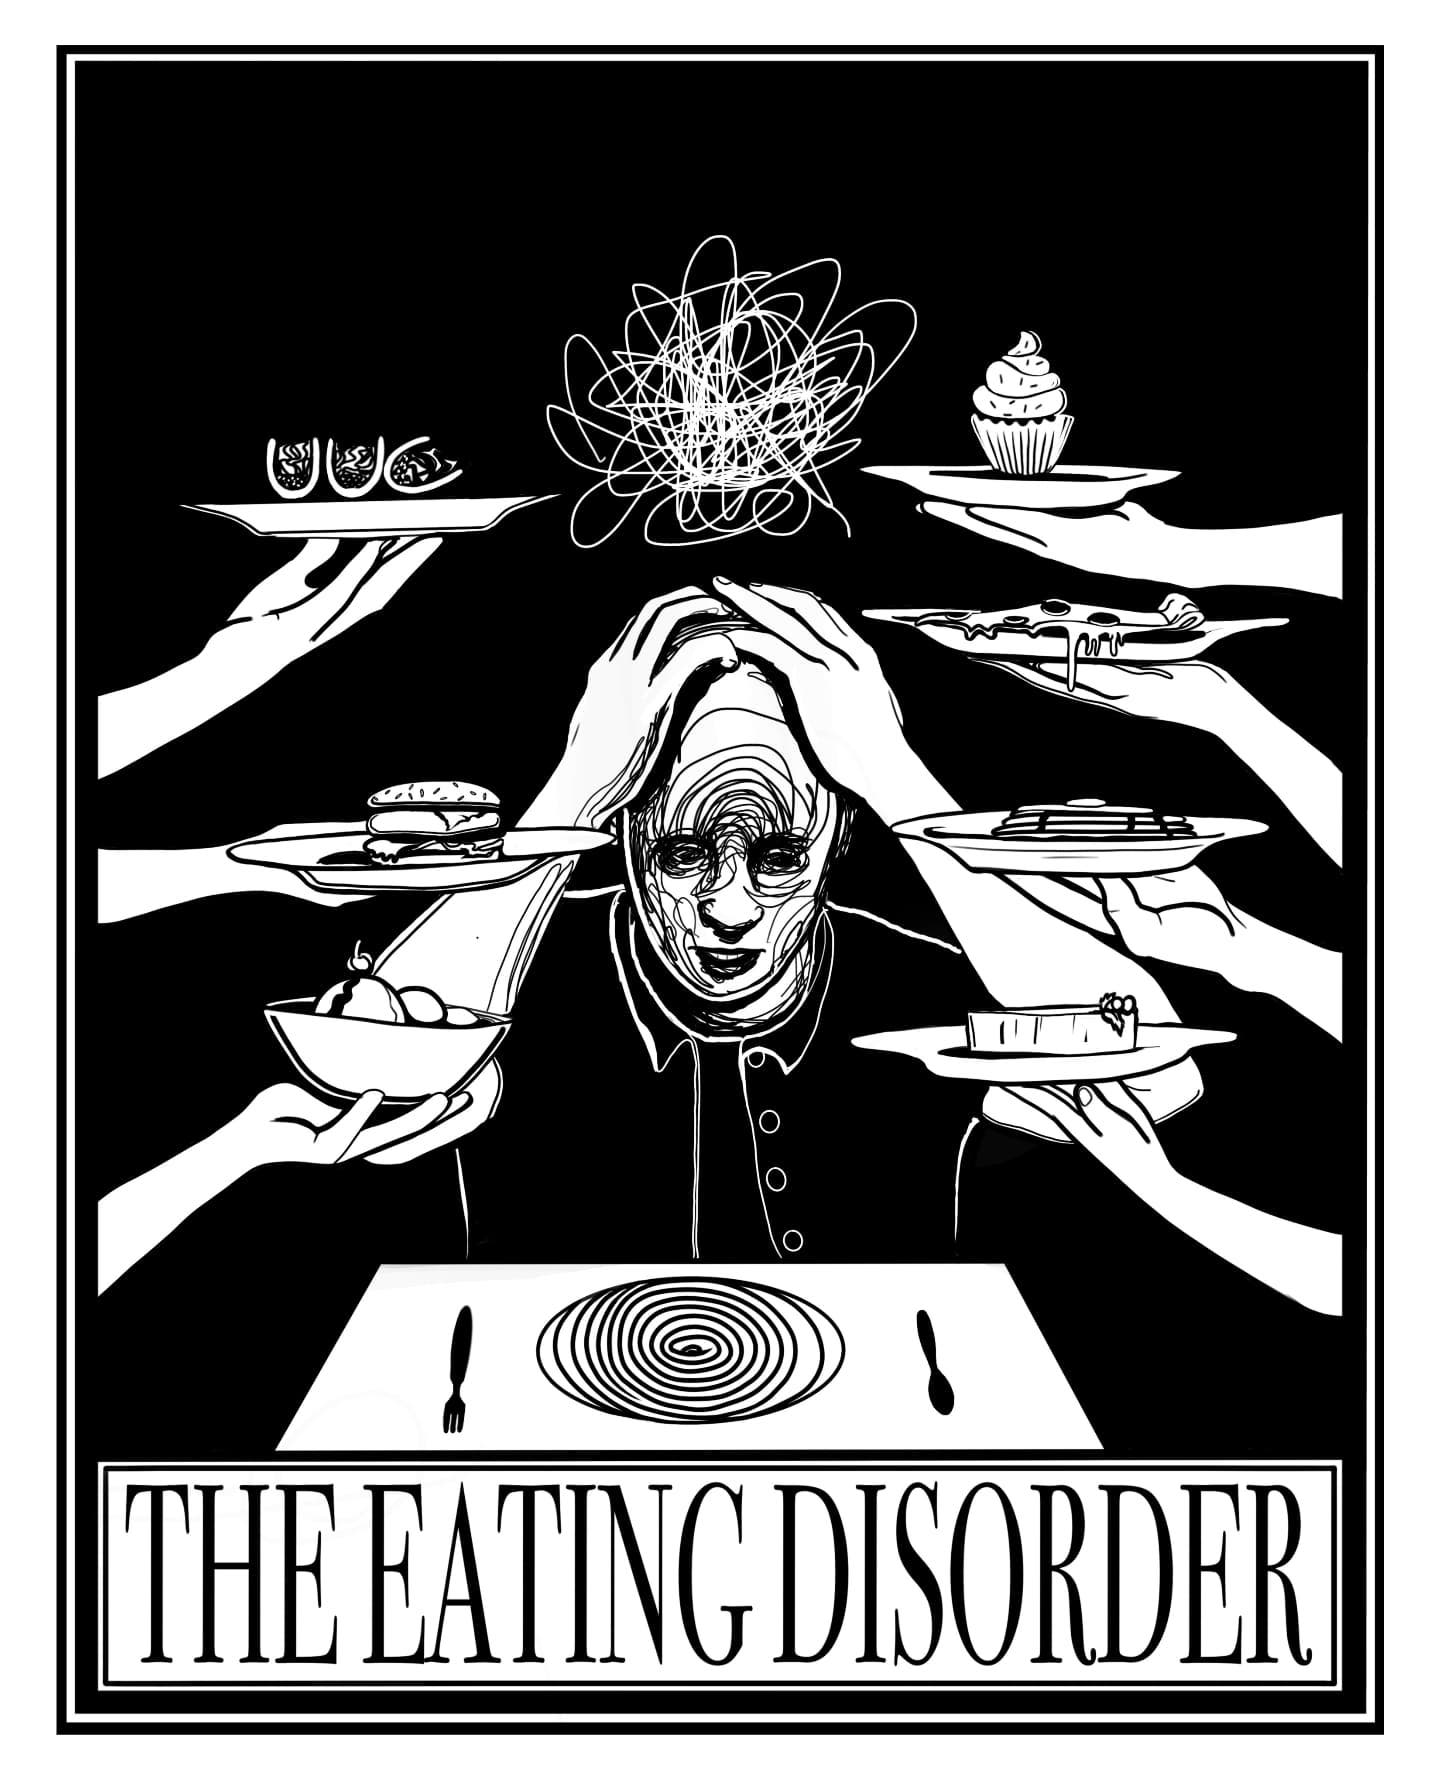 " The Eating Disorder "

This one took me a while.. maybe I needed a break, maybe I have a food disorder I have been put